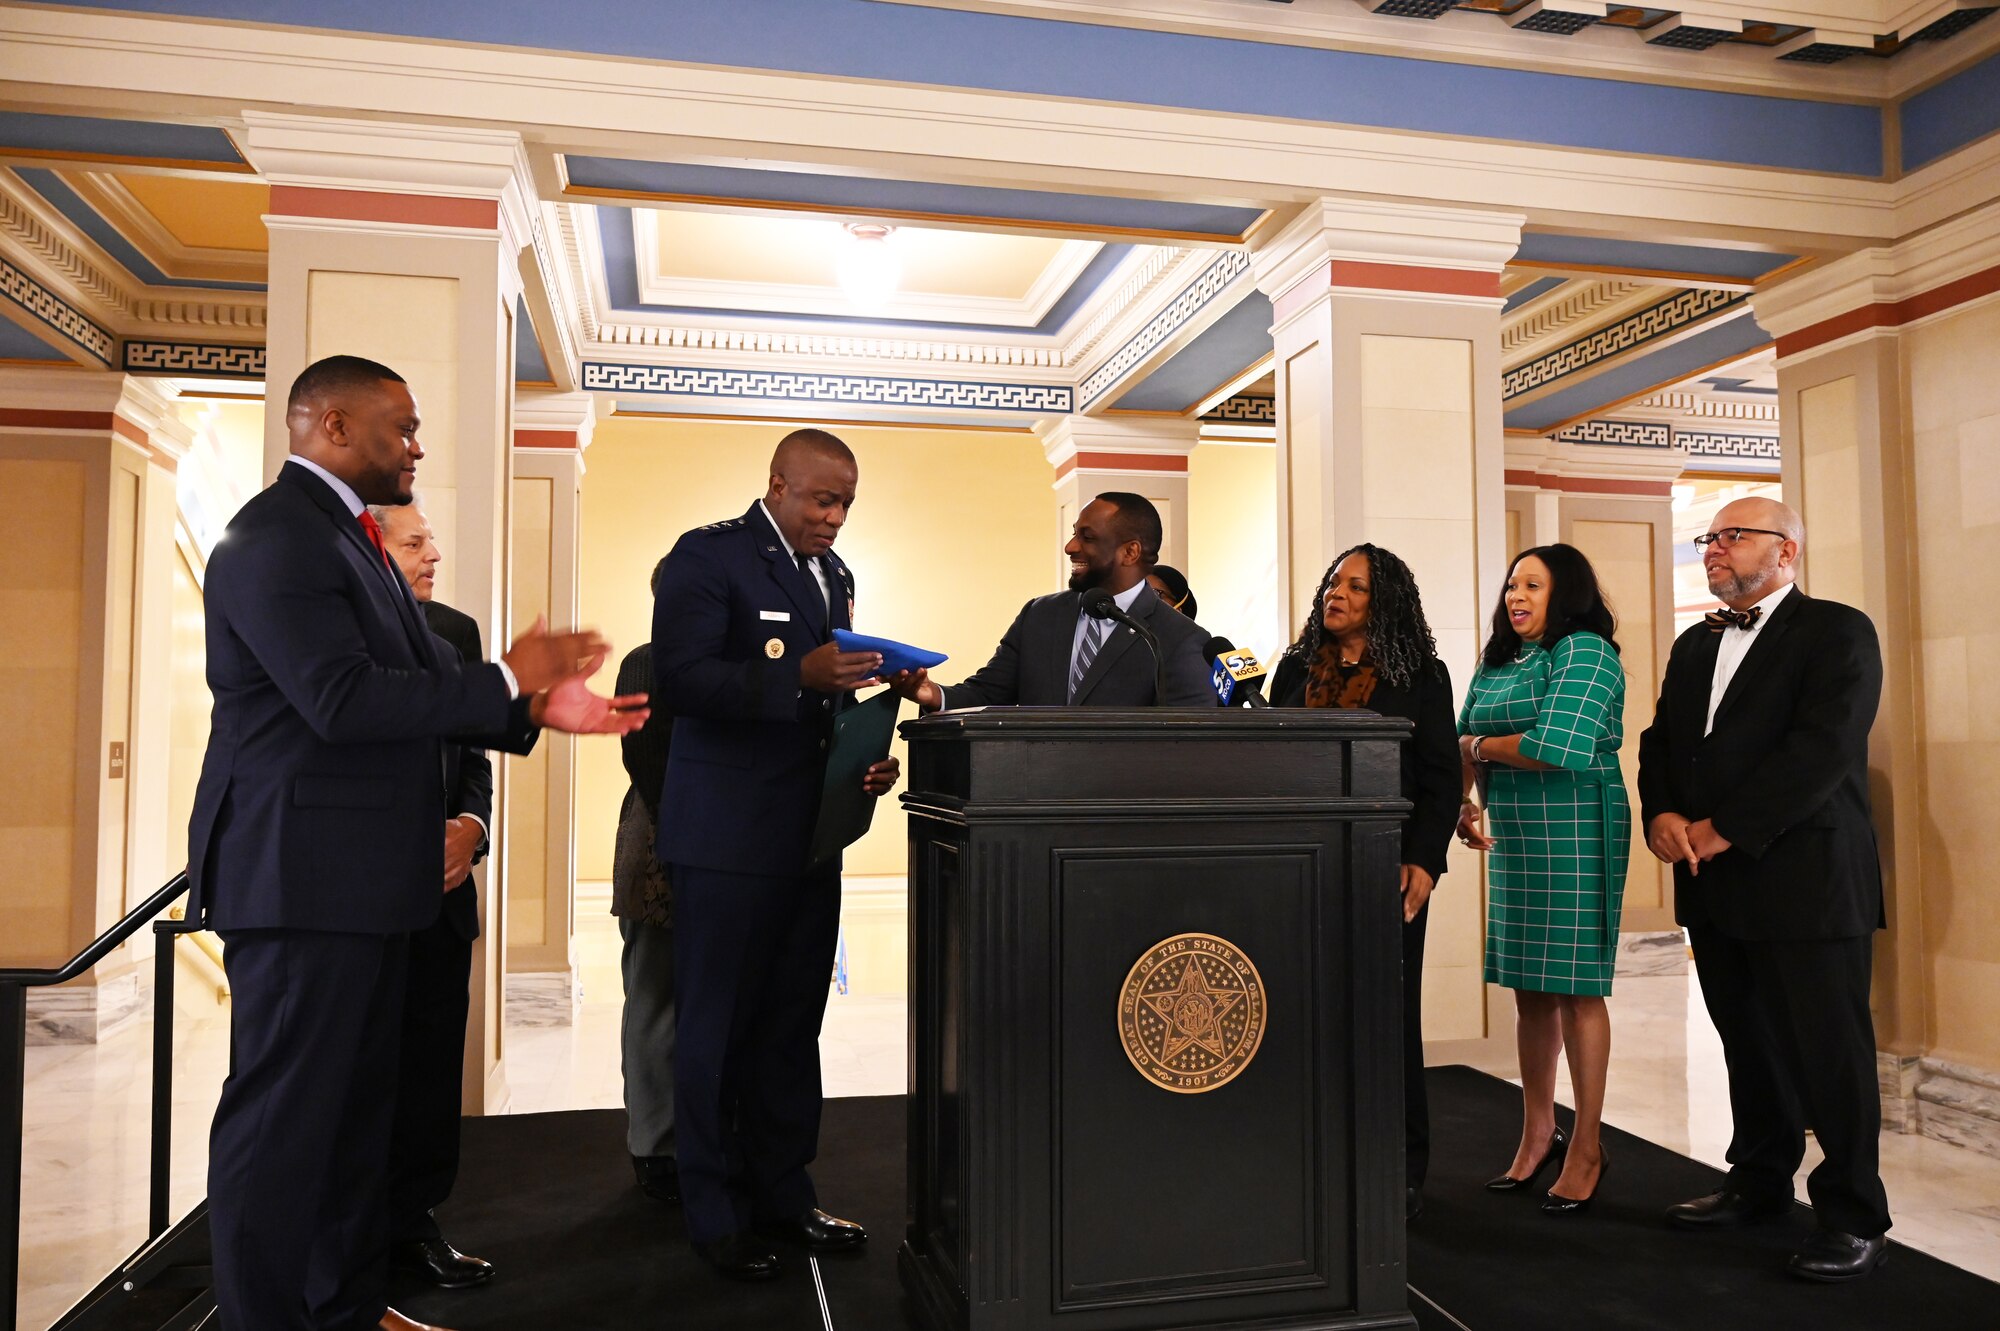 Lt. Gen. Stacey Hawkins, Air Force Sustainment Center commander, speaks to a crowd of students, community leaders, and Oklahoma State leaders during his keynote address at the inaugural Oklahoma Black History Day at the Capitol on Feb 13. (U.S. Air Force photo by Lemitchel King)